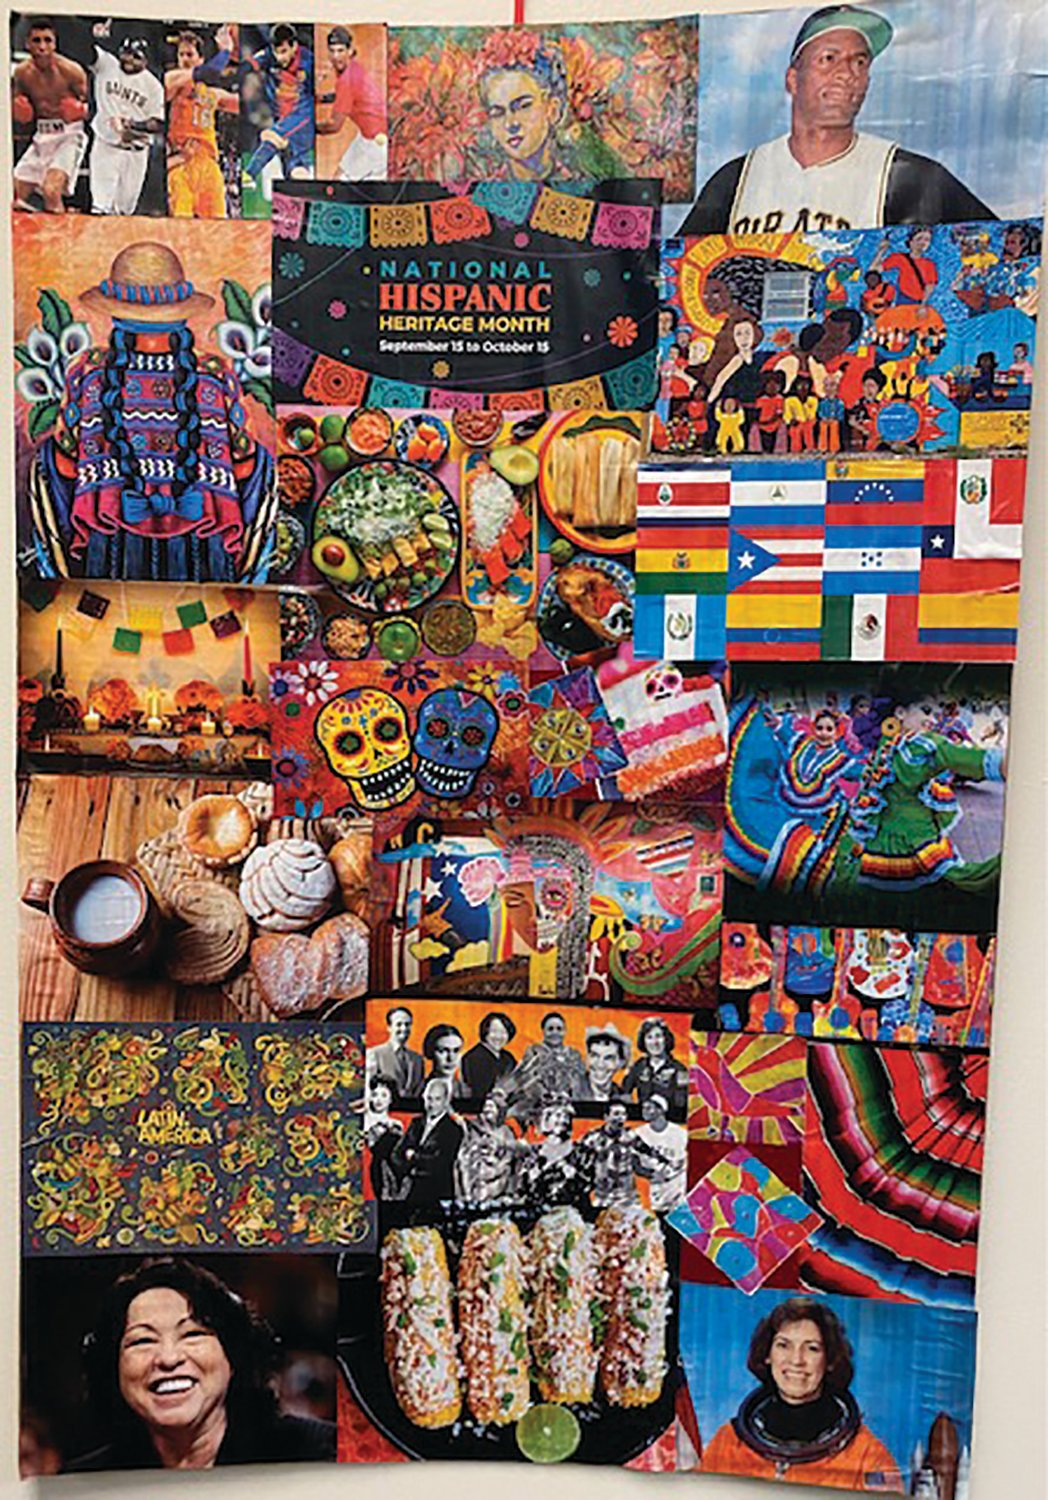 A collage of various Hispanic figures and traditions is displayed at Prairie High School.